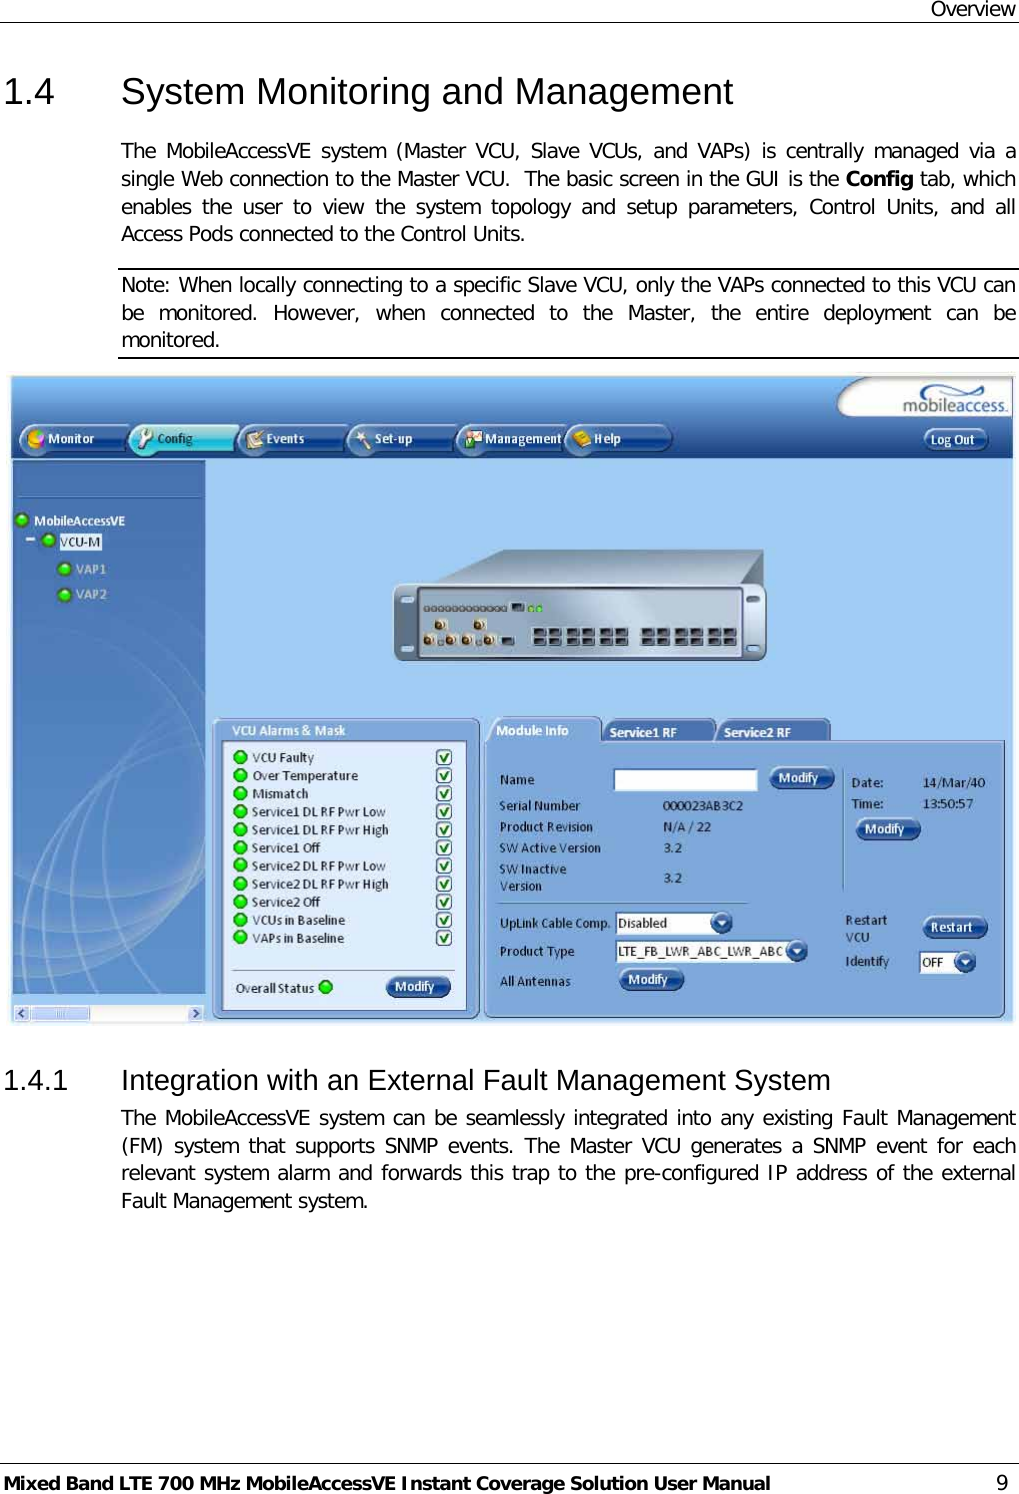 Overview Mixed Band LTE 700 MHz MobileAccessVE Instant Coverage Solution User Manual  9 1.4  System Monitoring and Management The MobileAccessVE system (Master VCU, Slave VCUs, and VAPs) is centrally managed via a single Web connection to the Master VCU.  The basic screen in the GUI is the Config tab, which enables the user to view the system topology and setup parameters, Control Units,  and all Access Pods connected to the Control Units. Note: When locally connecting to a specific Slave VCU, only the VAPs connected to this VCU can be monitored. However, when connected to the Master,  the entire deployment can be monitored.   1.4.1  Integration with an External Fault Management System The MobileAccessVE system can be seamlessly integrated into any existing Fault Management (FM) system that supports SNMP events. The Master VCU generates a SNMP event for each relevant system alarm and forwards this trap to the pre-configured IP address of the external Fault Management system.  